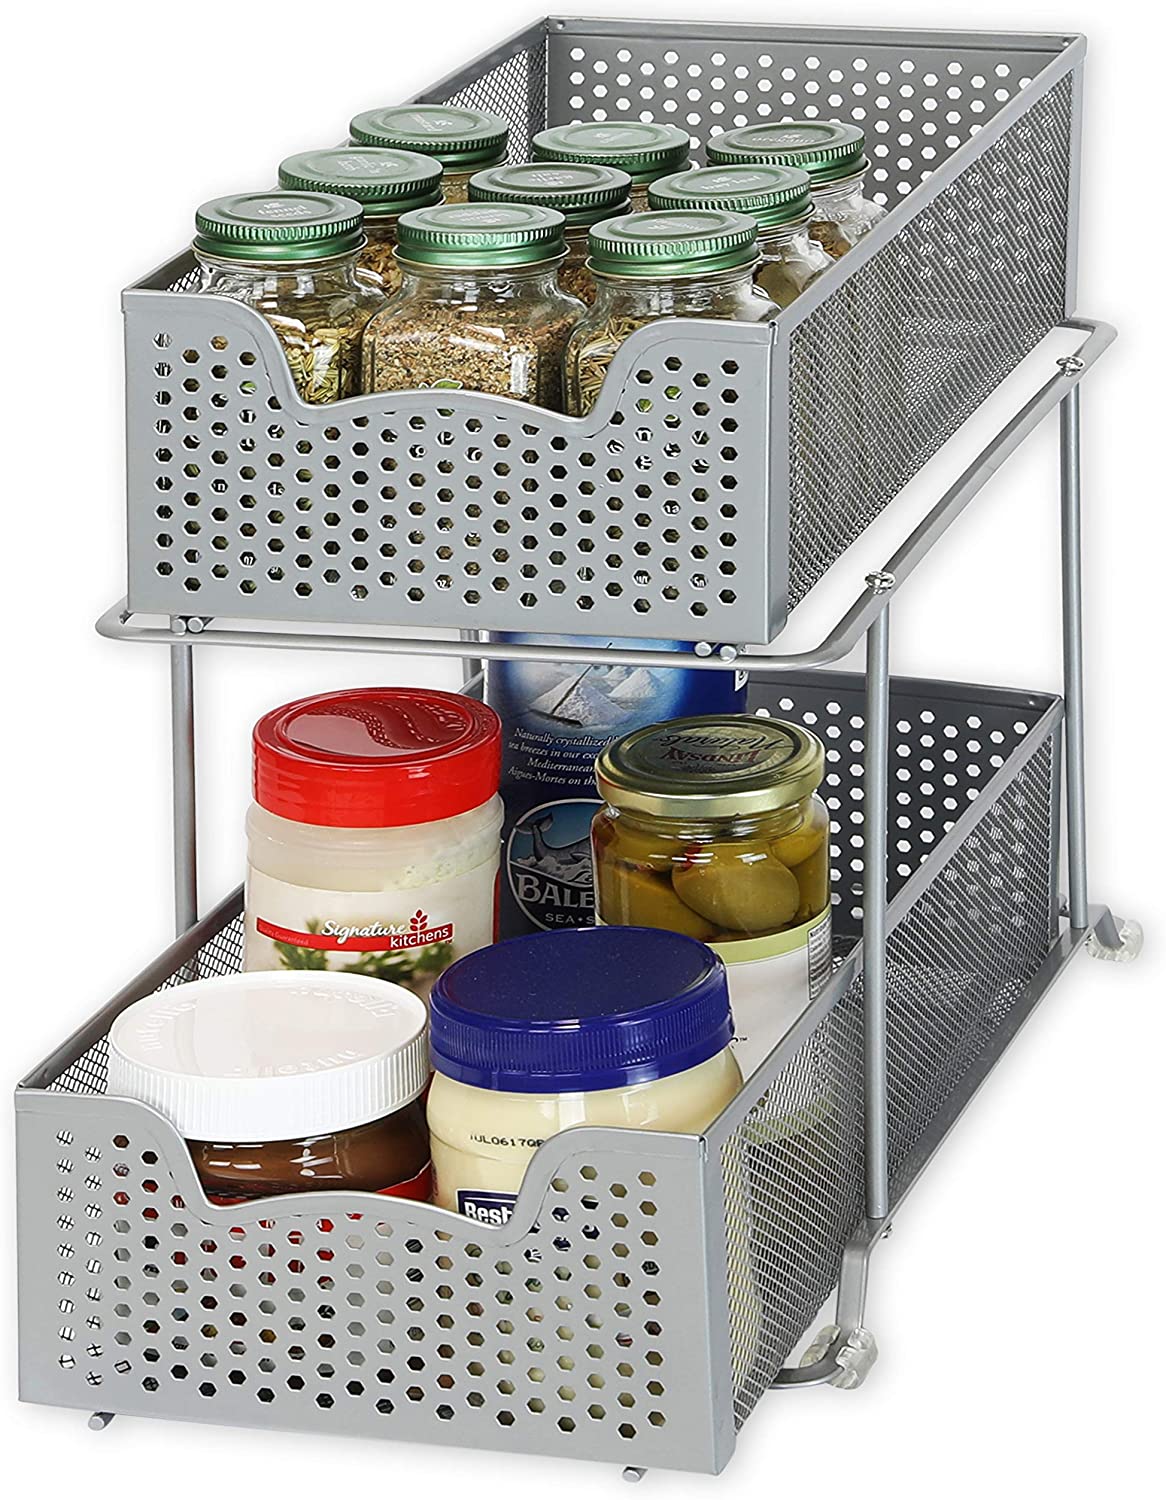 Two layers cabinet basket with kitchen ingredients